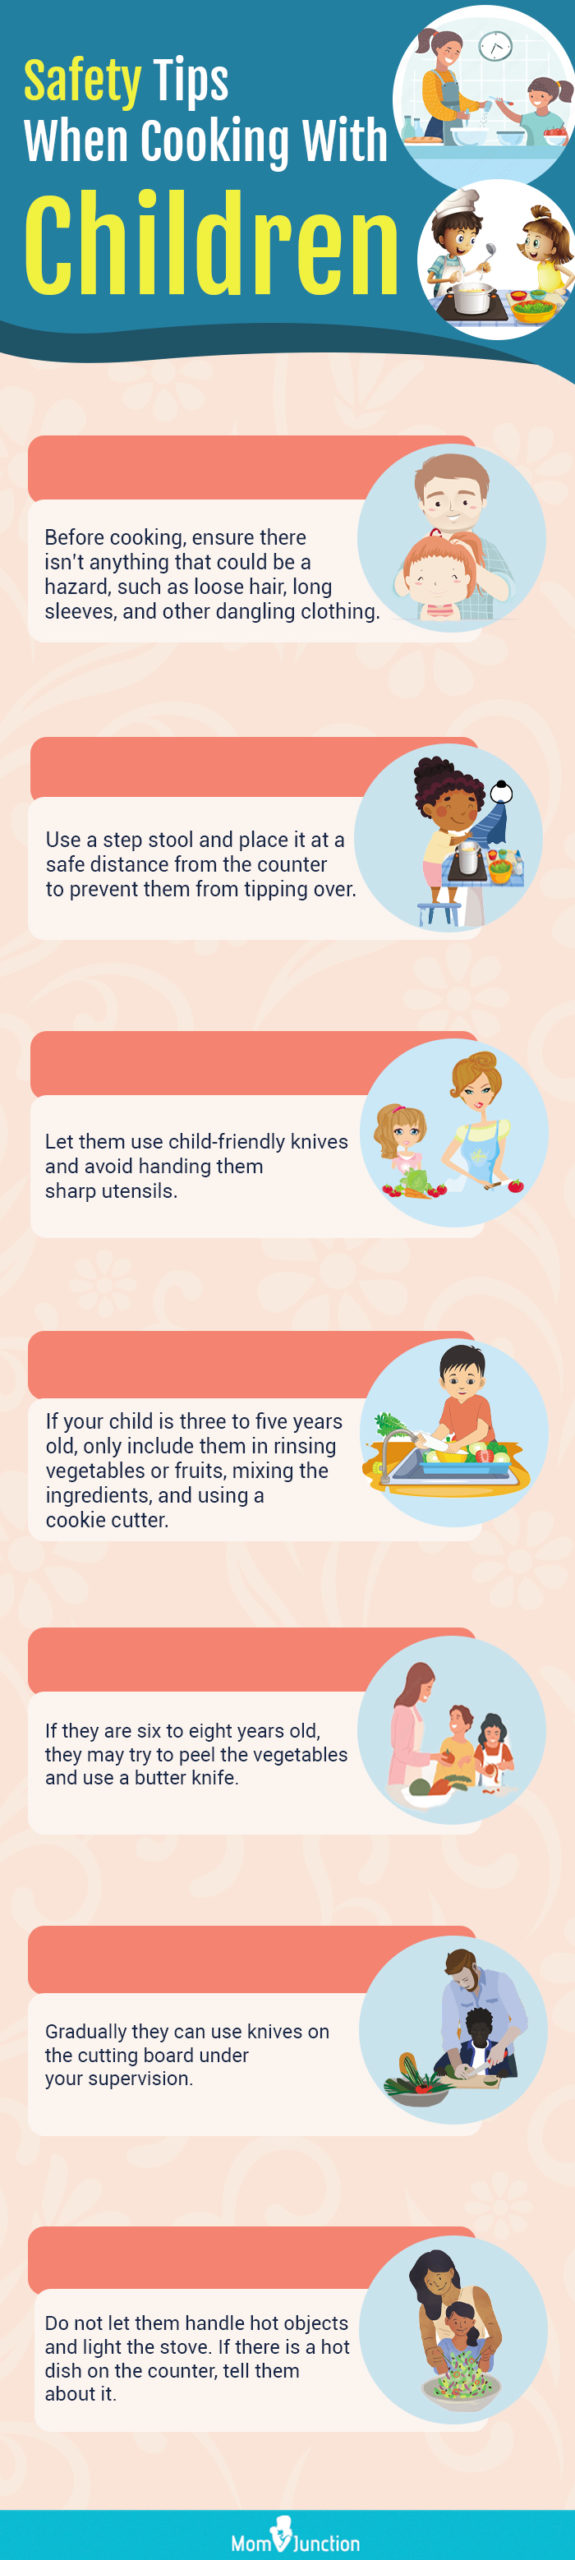 safety tips when cooking with children (infographic)